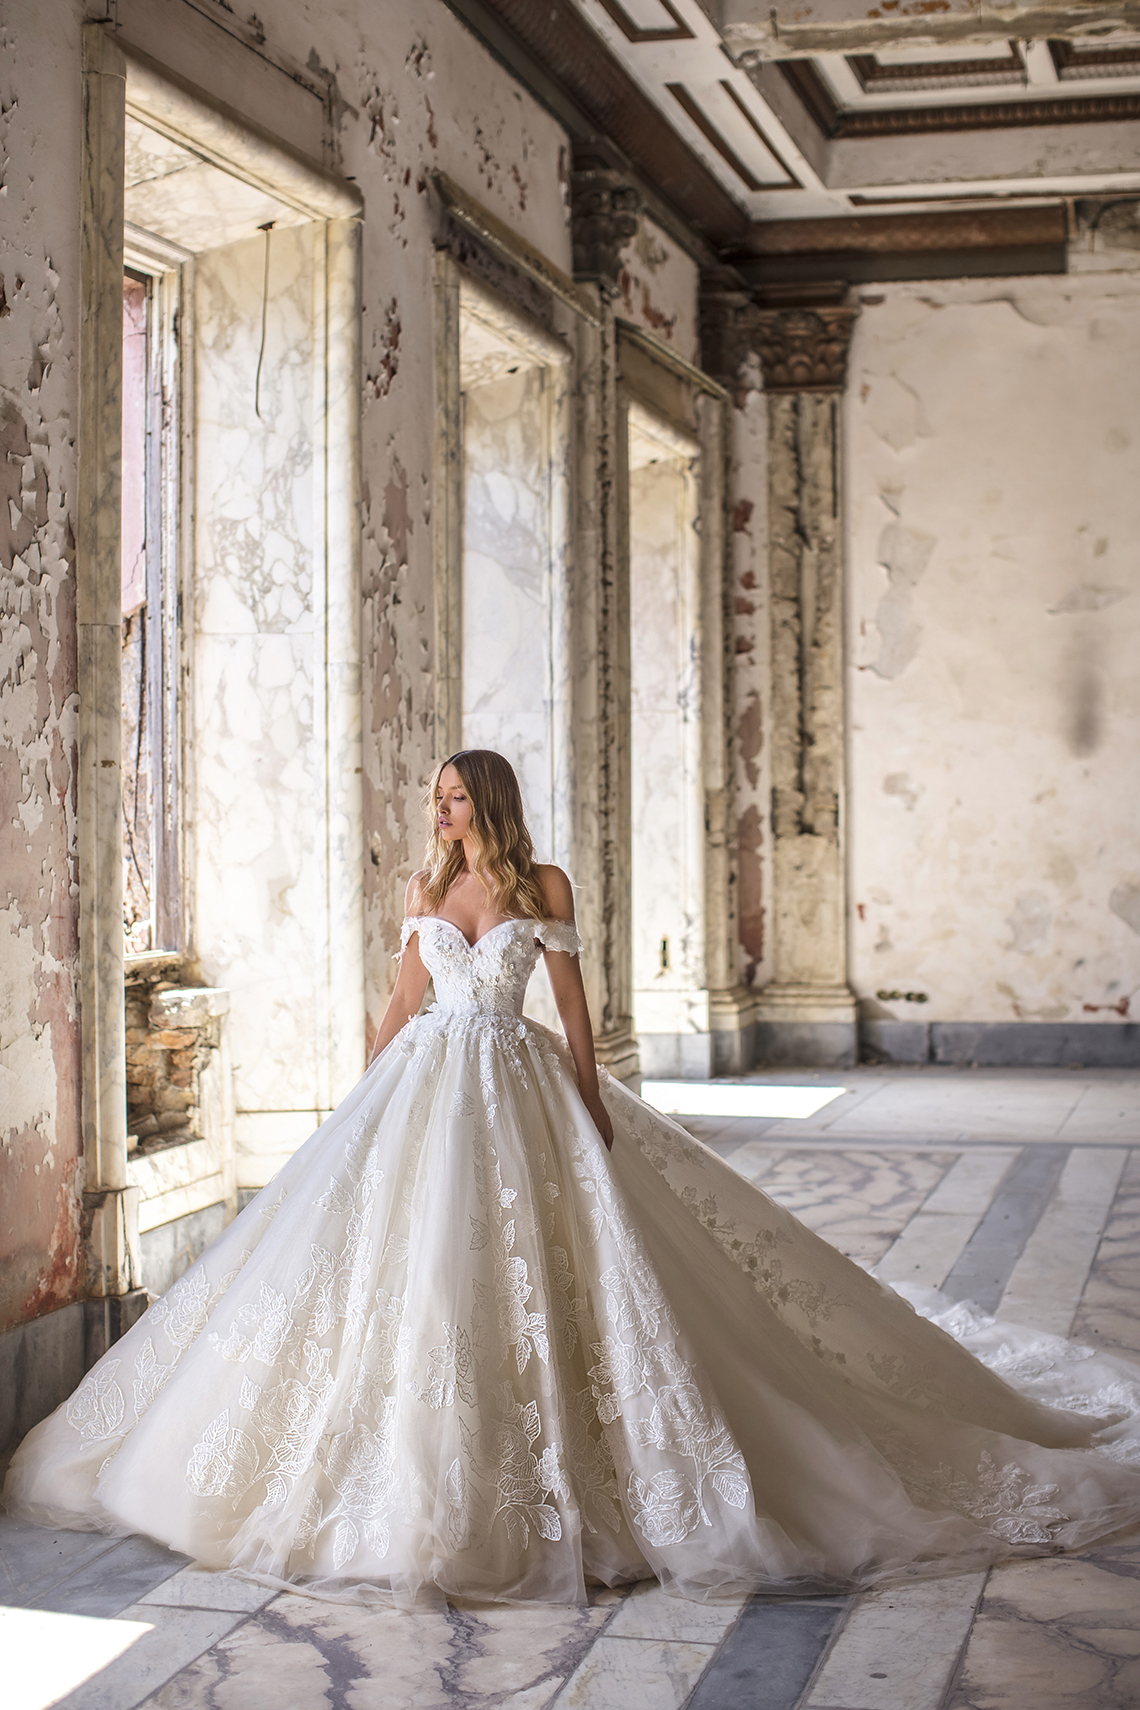 Dazzling wedding dresses for the bride who wants to make a statement